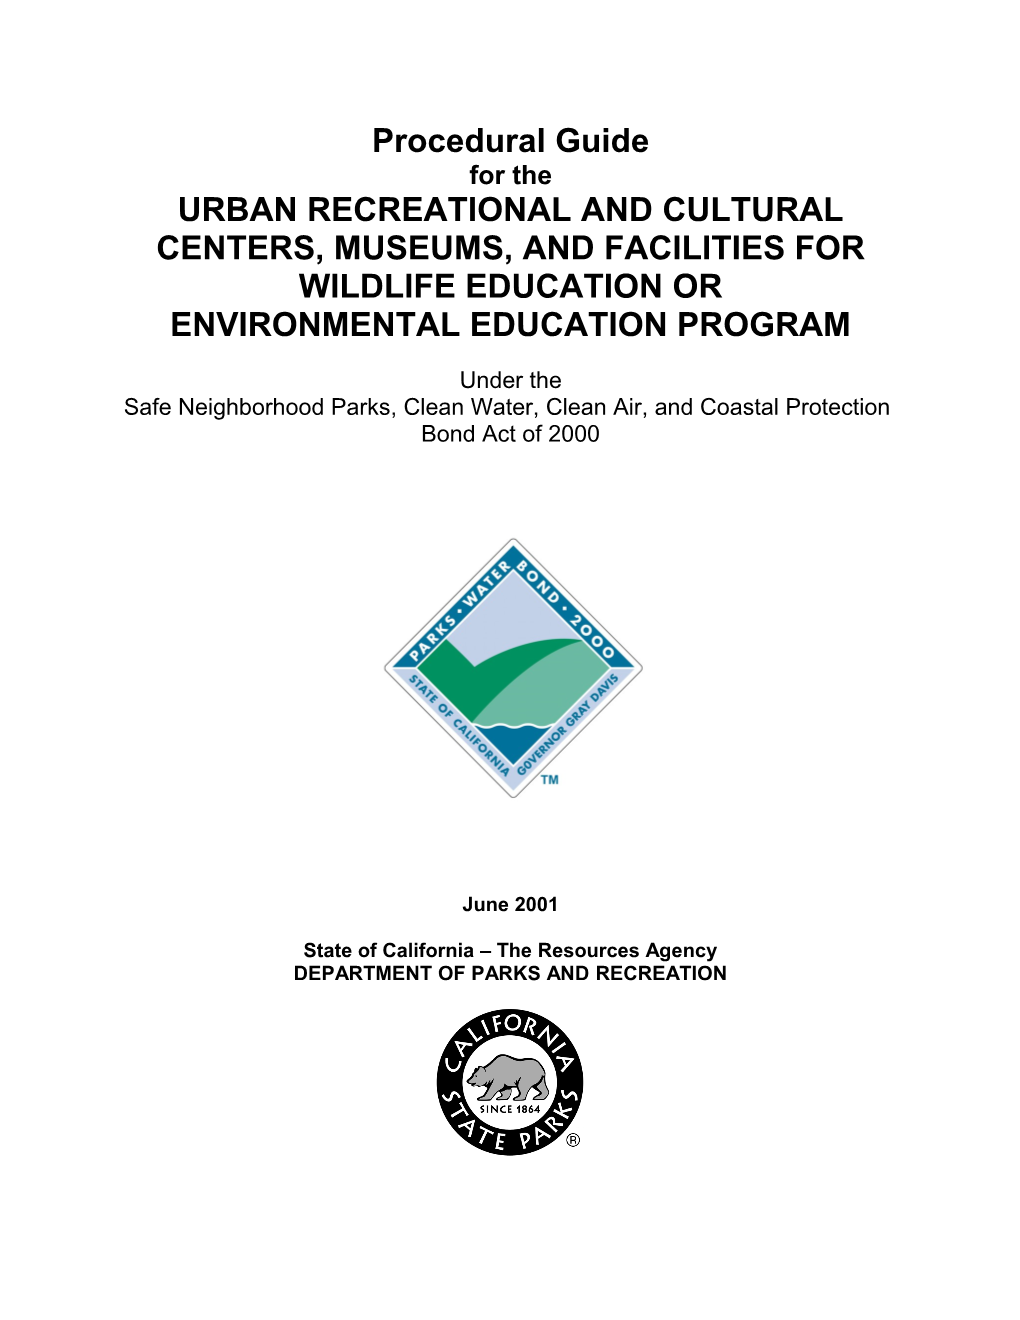 Urban Recreational and Cultural Centers, Museums, and Facilities for Wildlife Education Or